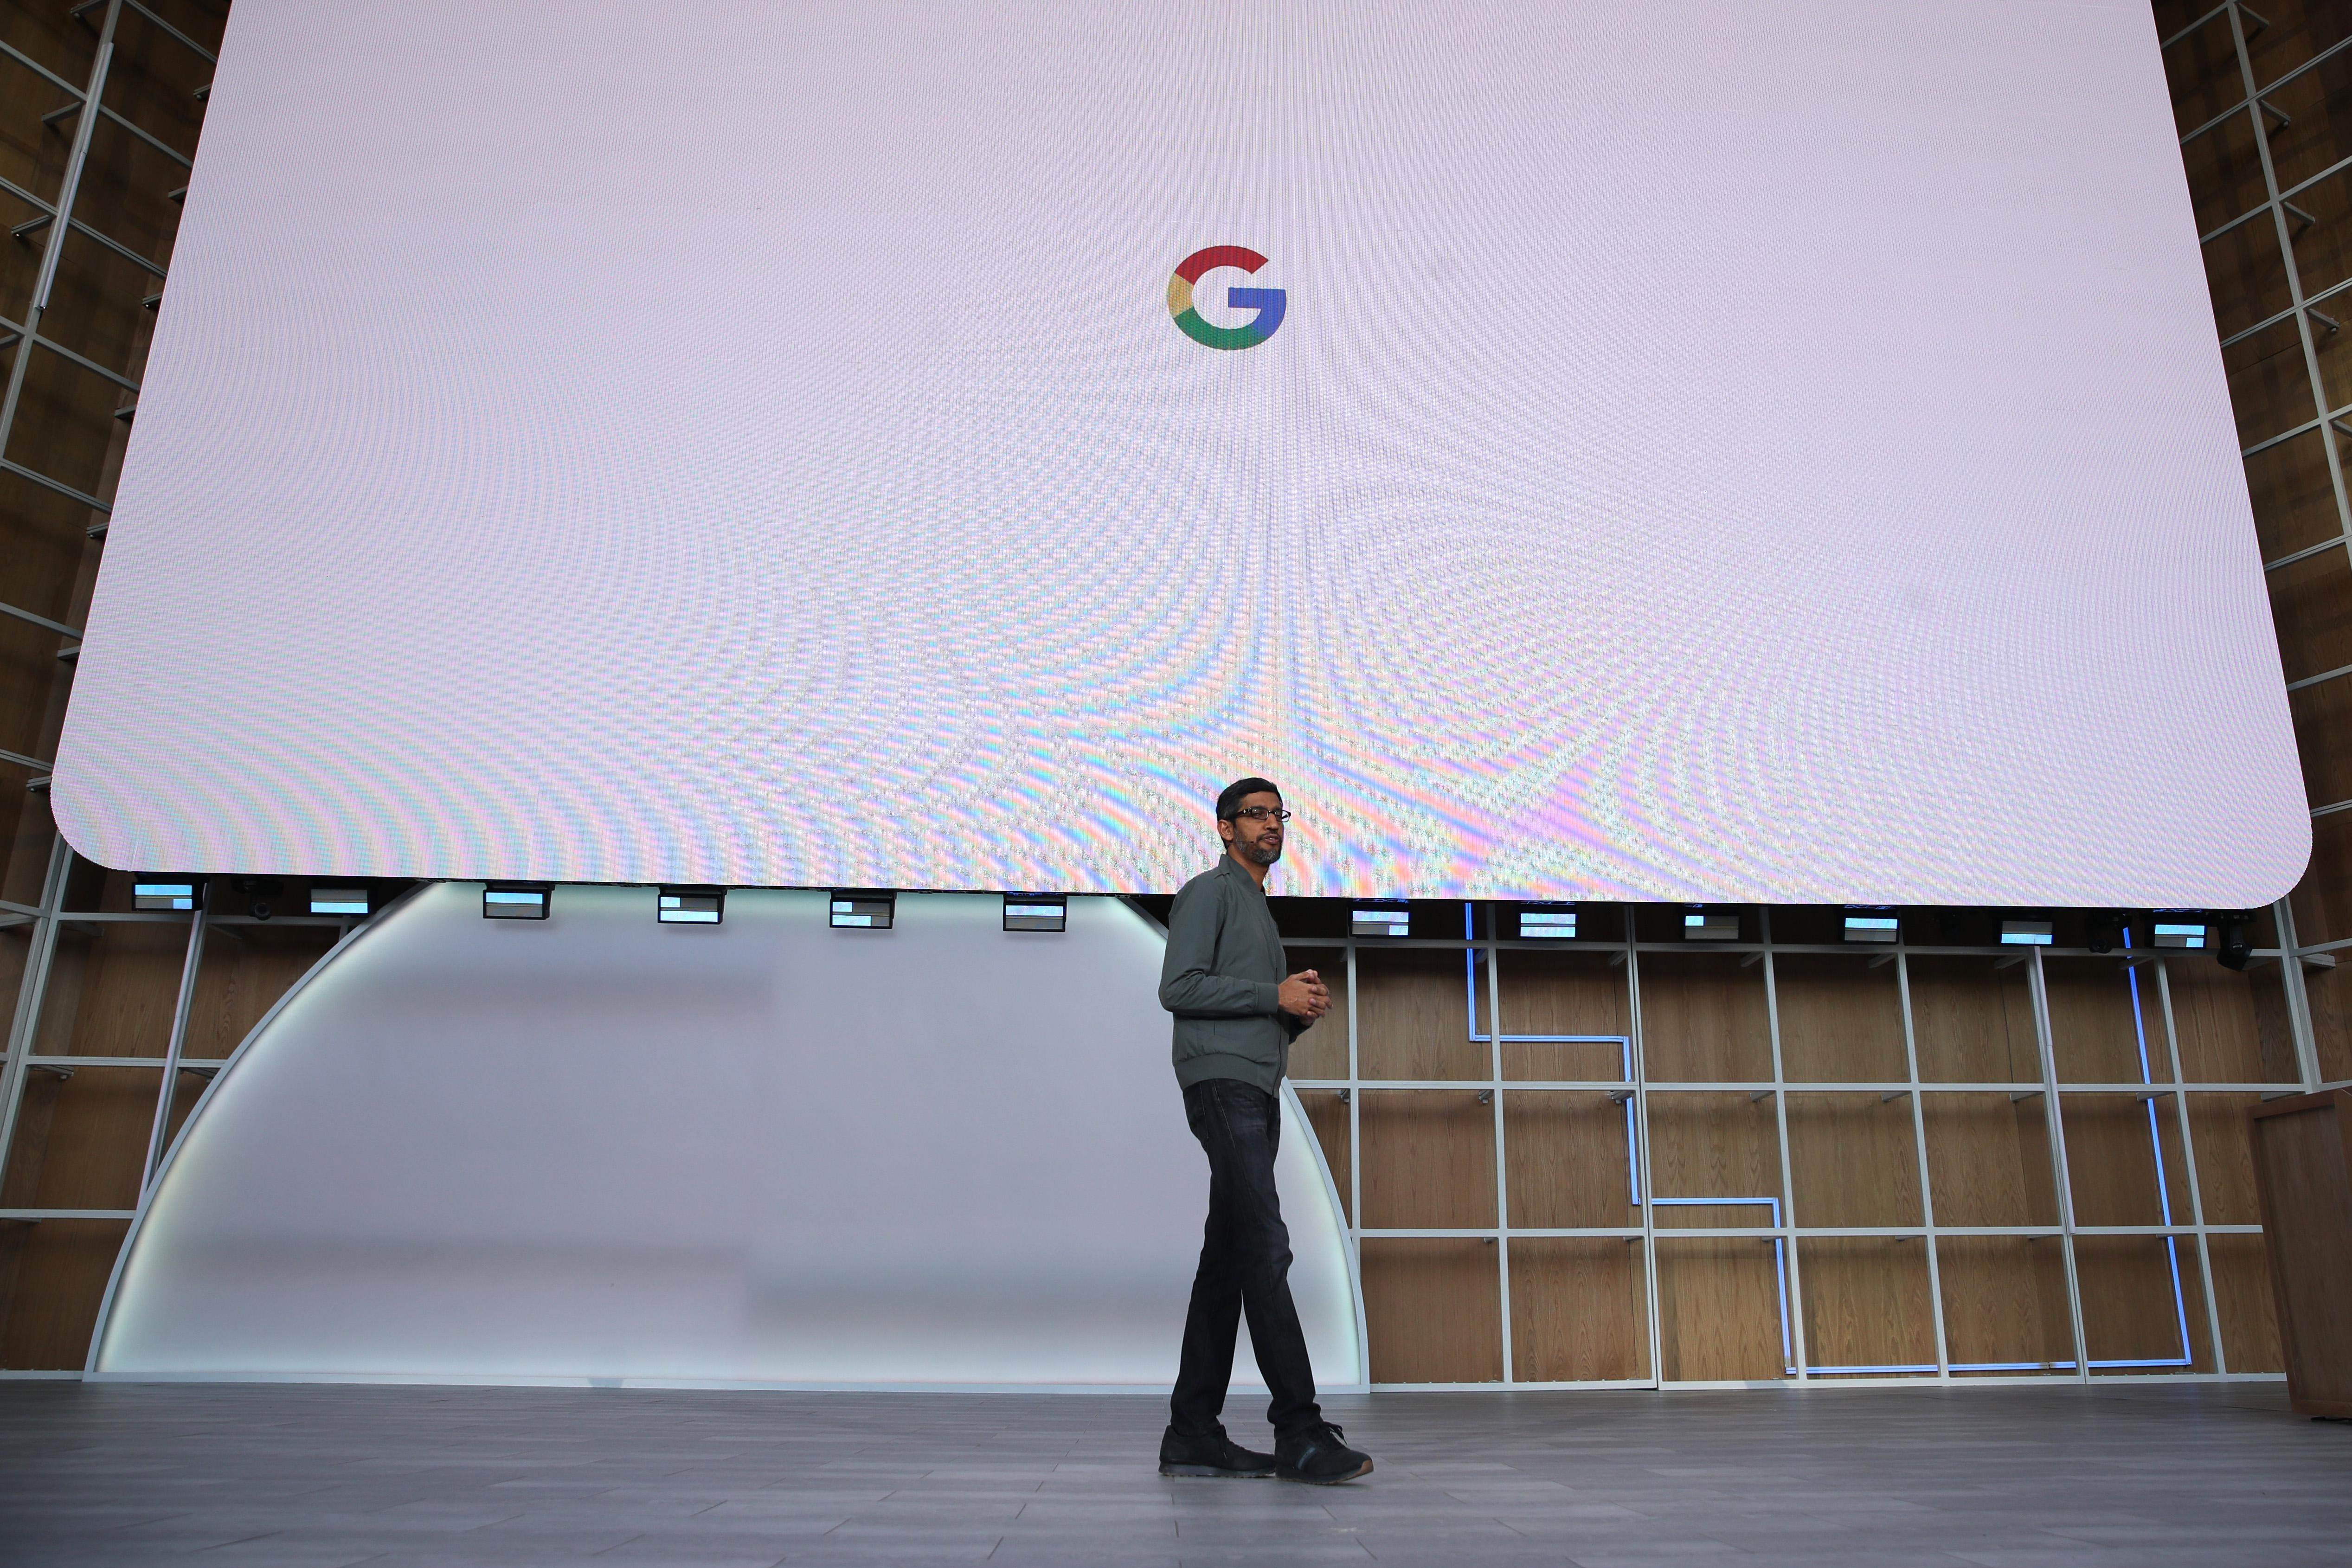 Sundar Pichai onstage in front of a huge screen displaying the Google logo.